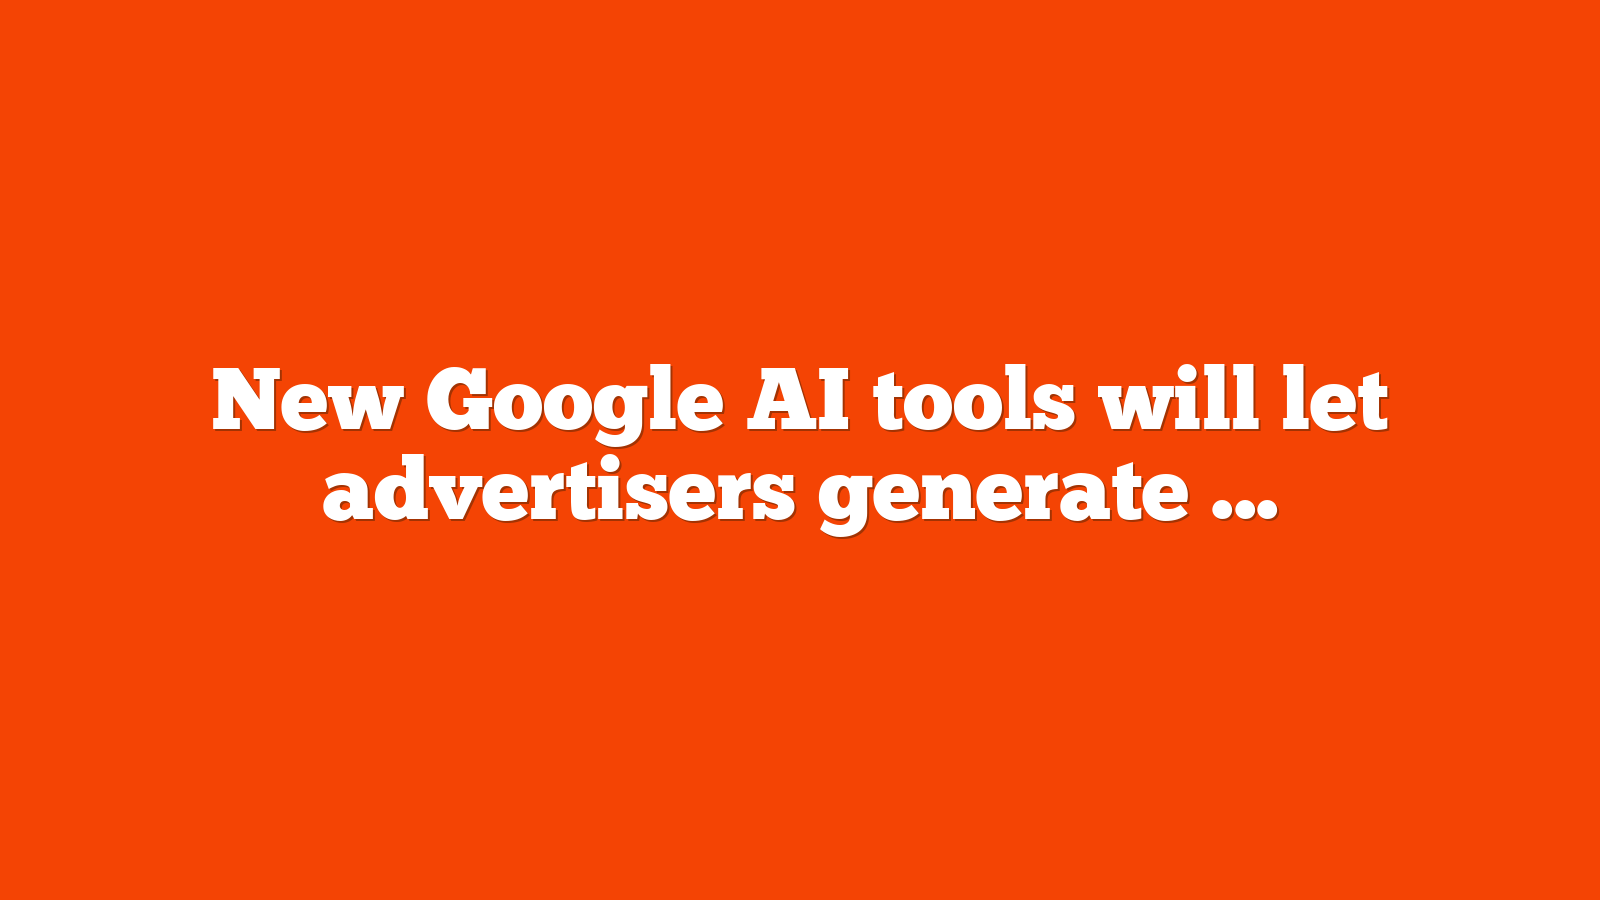 New Google AI tools will let advertisers generate media assets